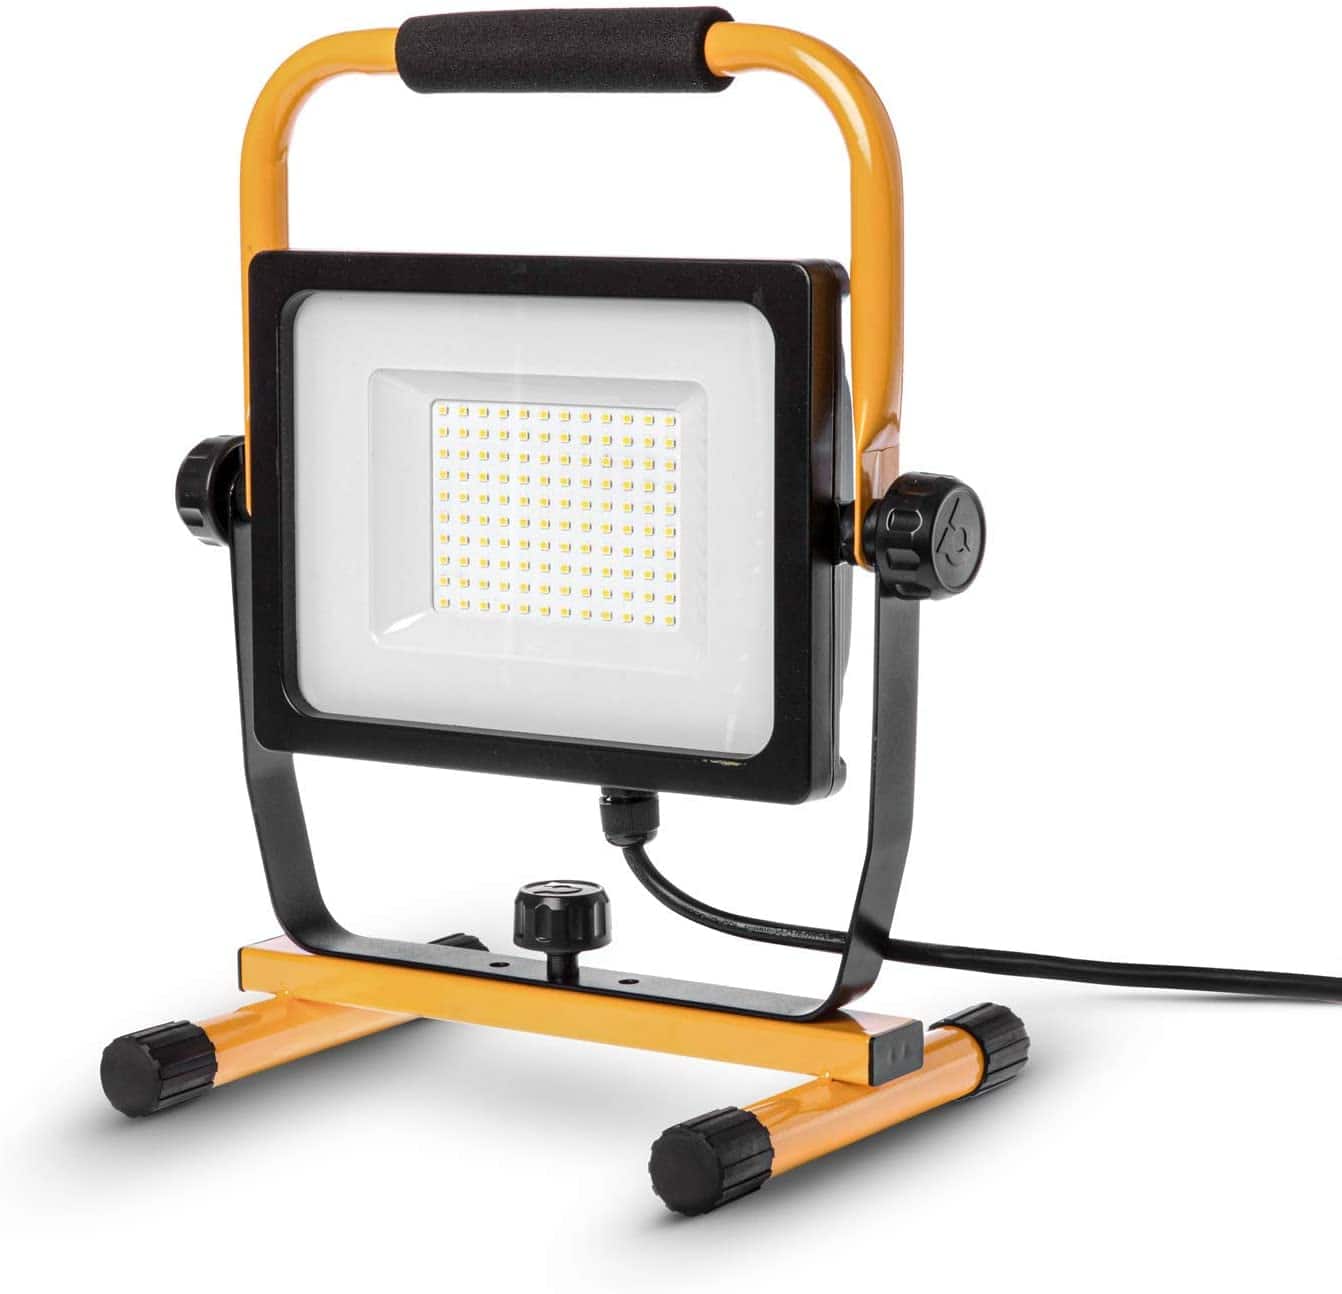 7,000 Lumen LED Work Light with Attachable Stand, ETL Certified  $21.99 + Free Shipping